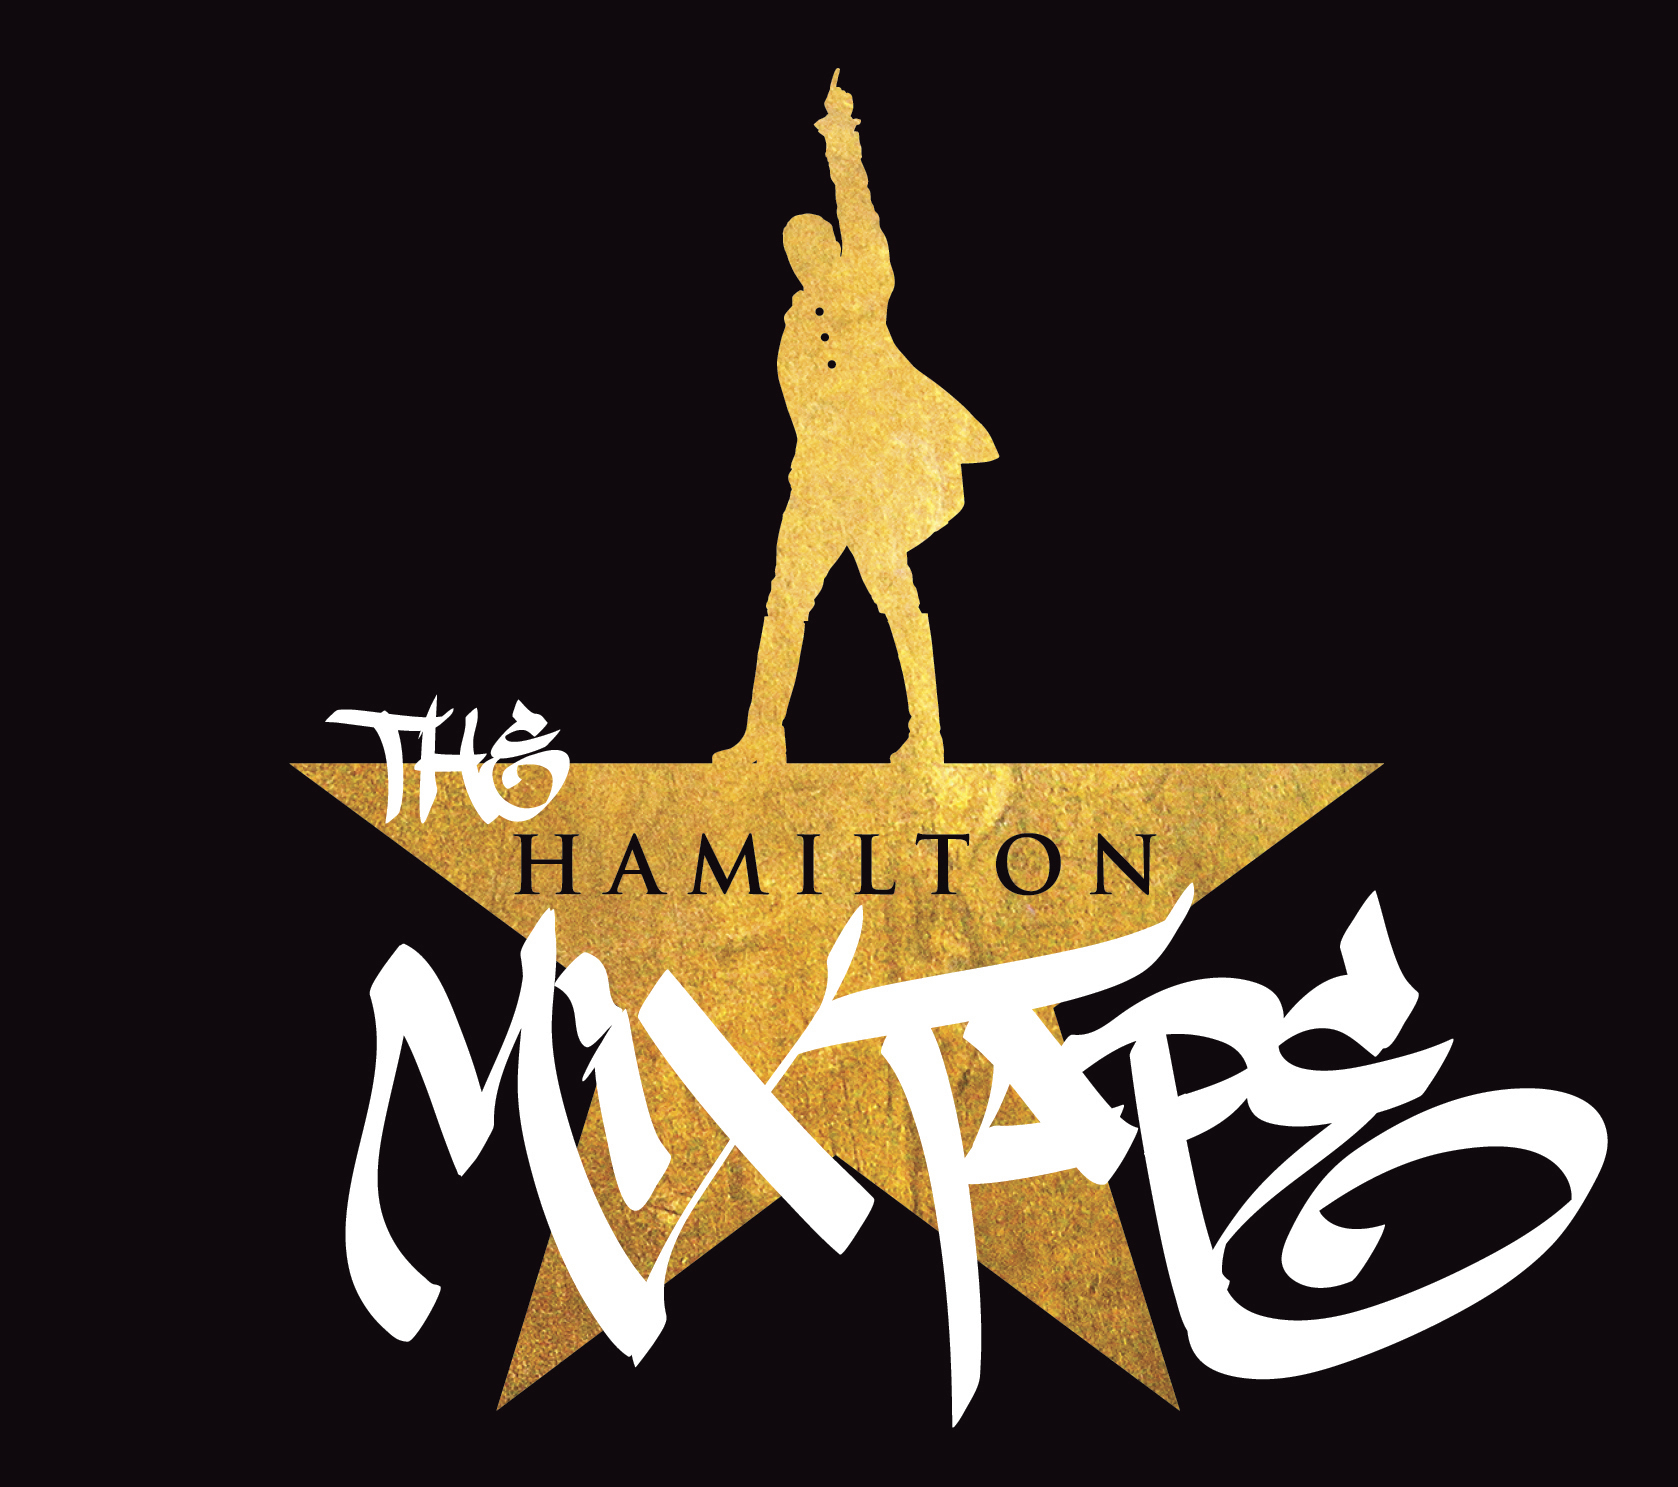 This CD cover image released by Atlantic Records shows "The Hamilton Mixtape." The 23-track “Hamilton Mixtape,” set for release Friday, features covers by such artists as Usher, Kelly Clarkson, Nas, Ben Folds, Alicia Keys, Ashanti, John Legend, Sia, Common, Wiz Khalifa, Queen Latifah, The Roots, Jill Scott and Busta Rhymes. (Atlantic Records via AP)